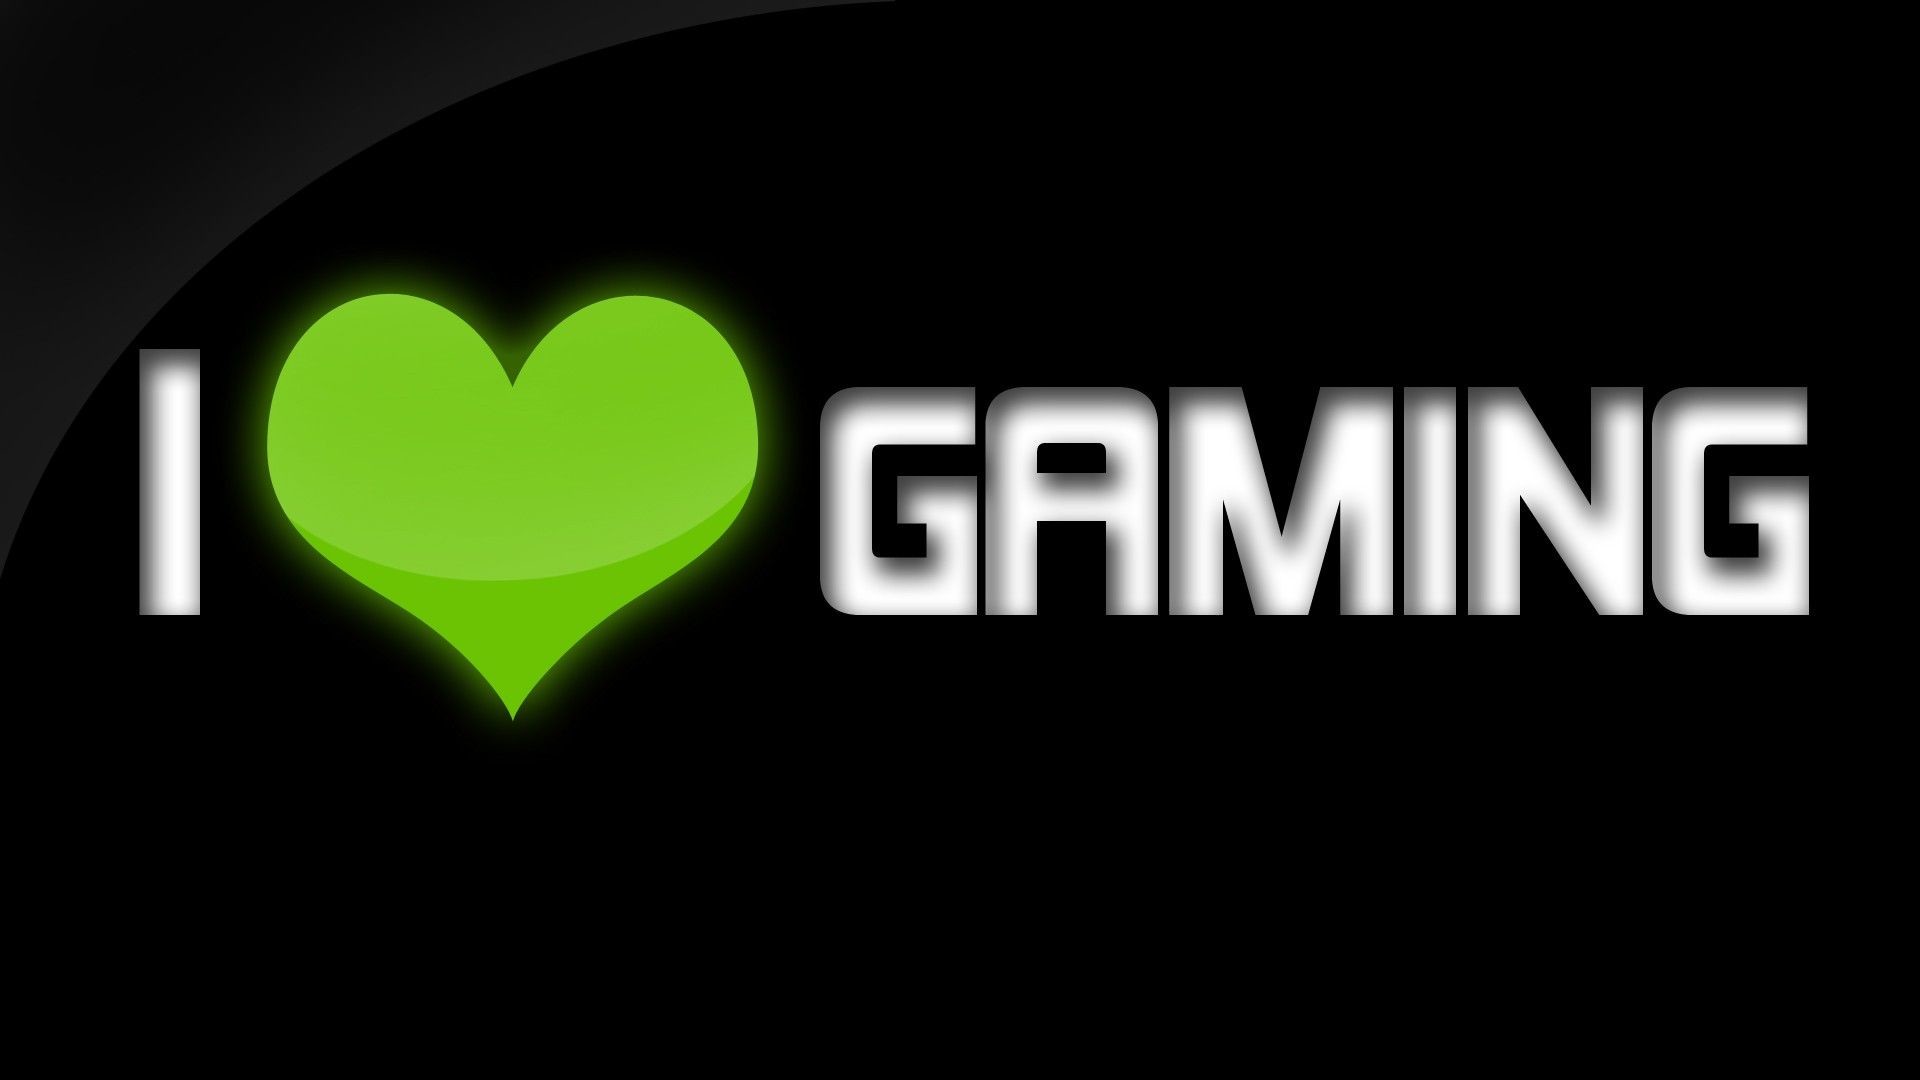 1920x1080 I Love Gaming Wallpapers, I Love Gaming Myspace Backgrounds, I ..